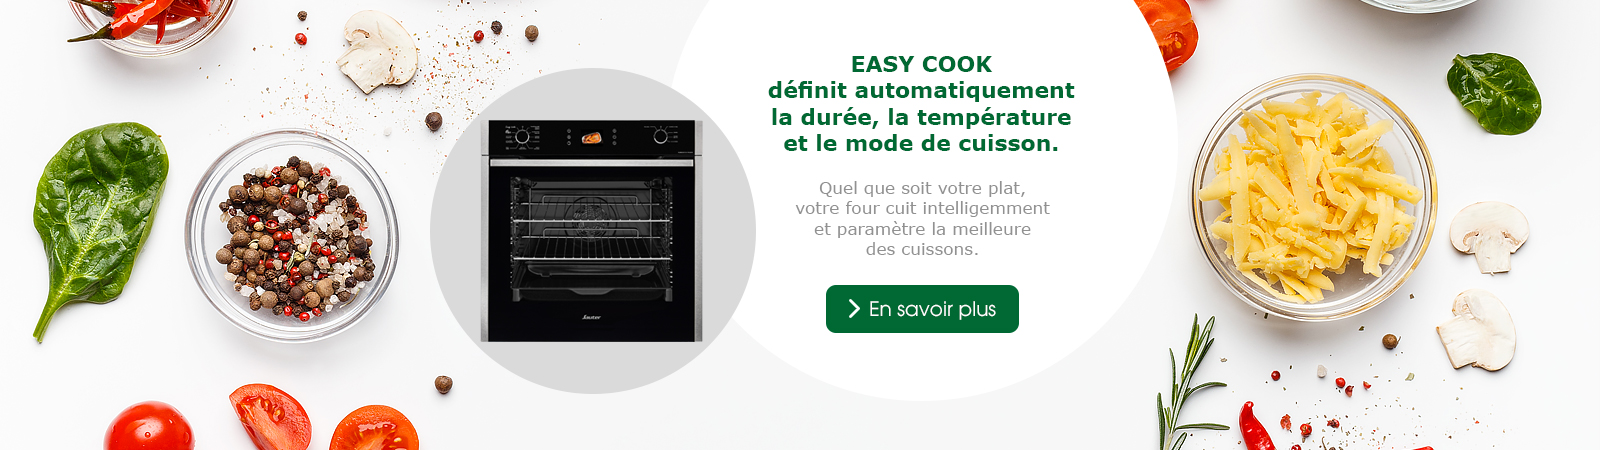 Sauter - fonction easy cook - FOURS